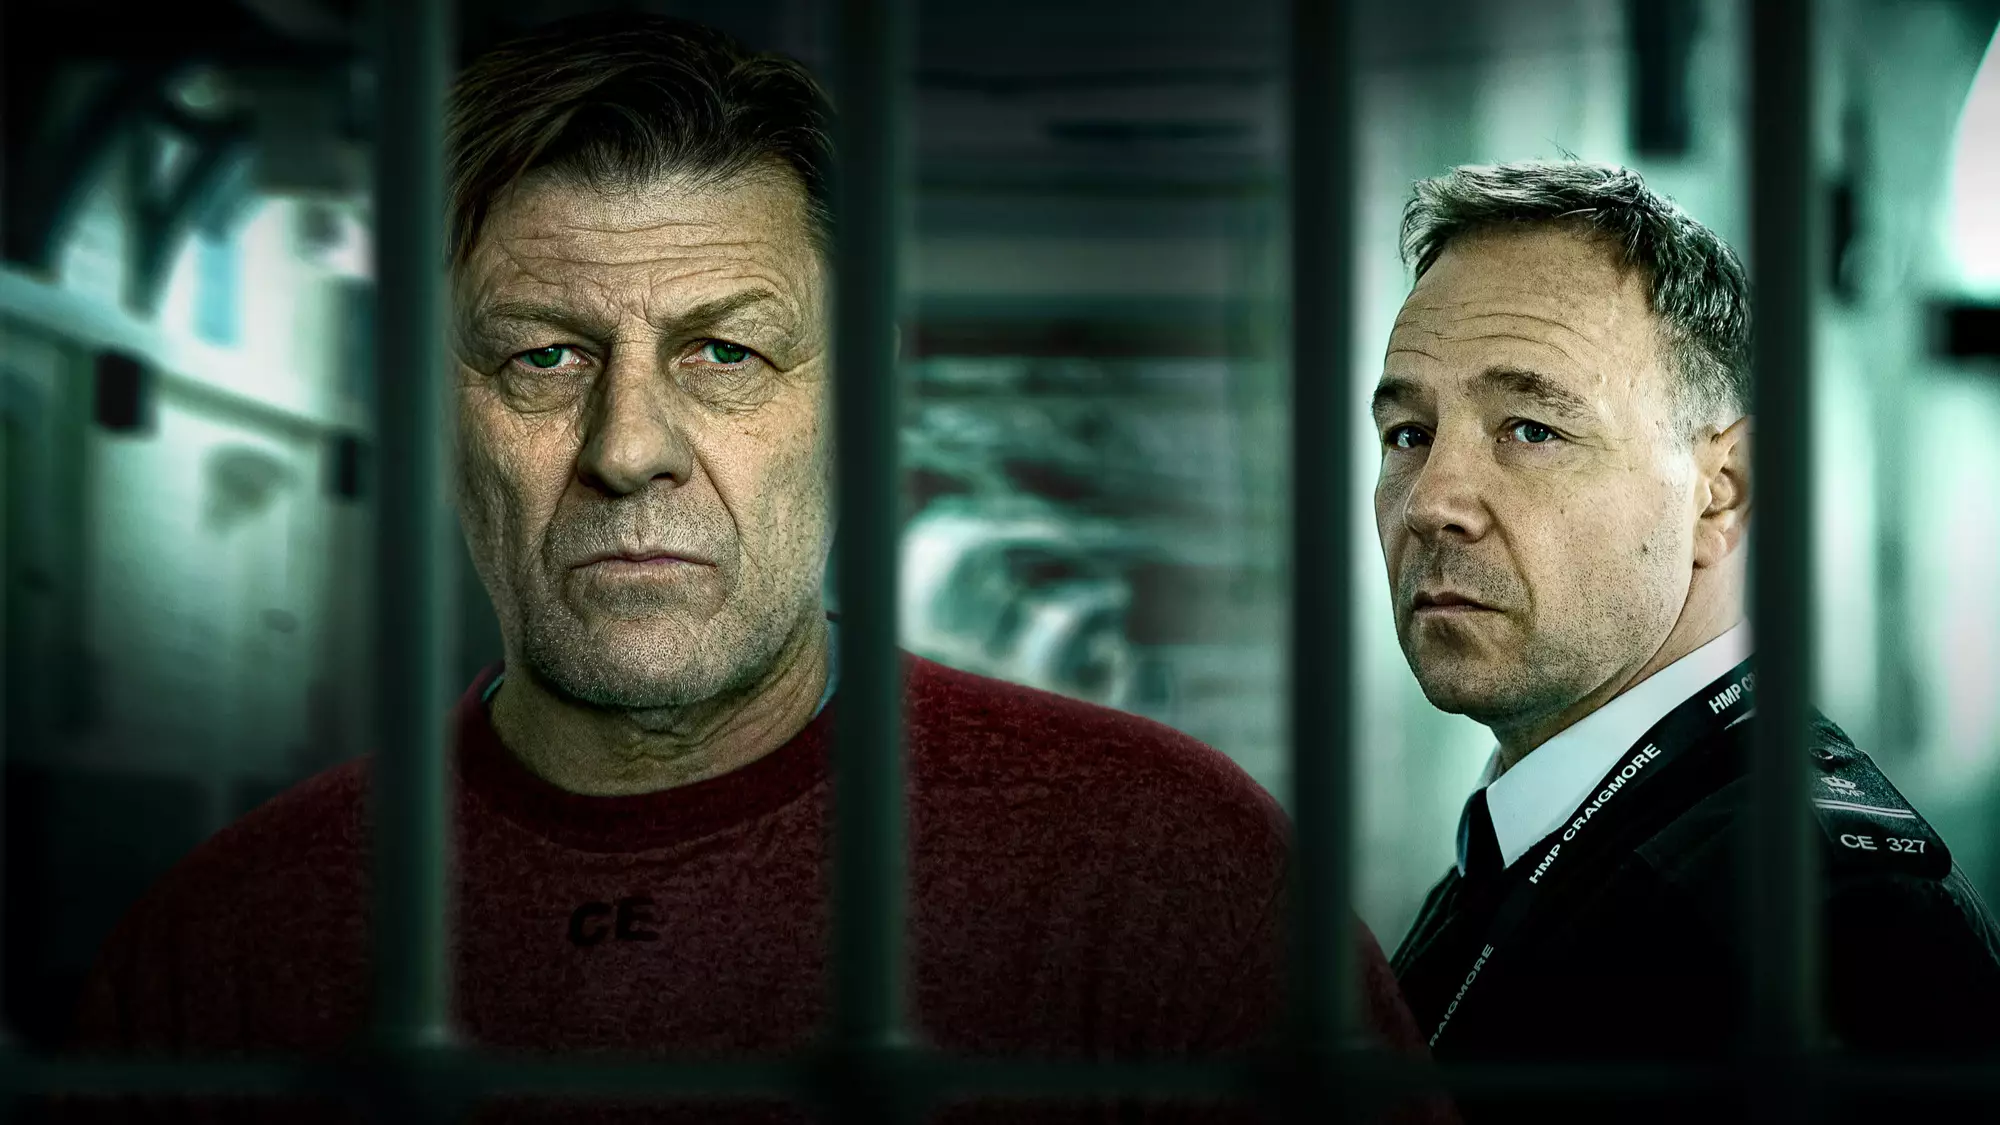 BBC Viewers Hail Prison Drama Time As The 'Best They've Seen In A While'